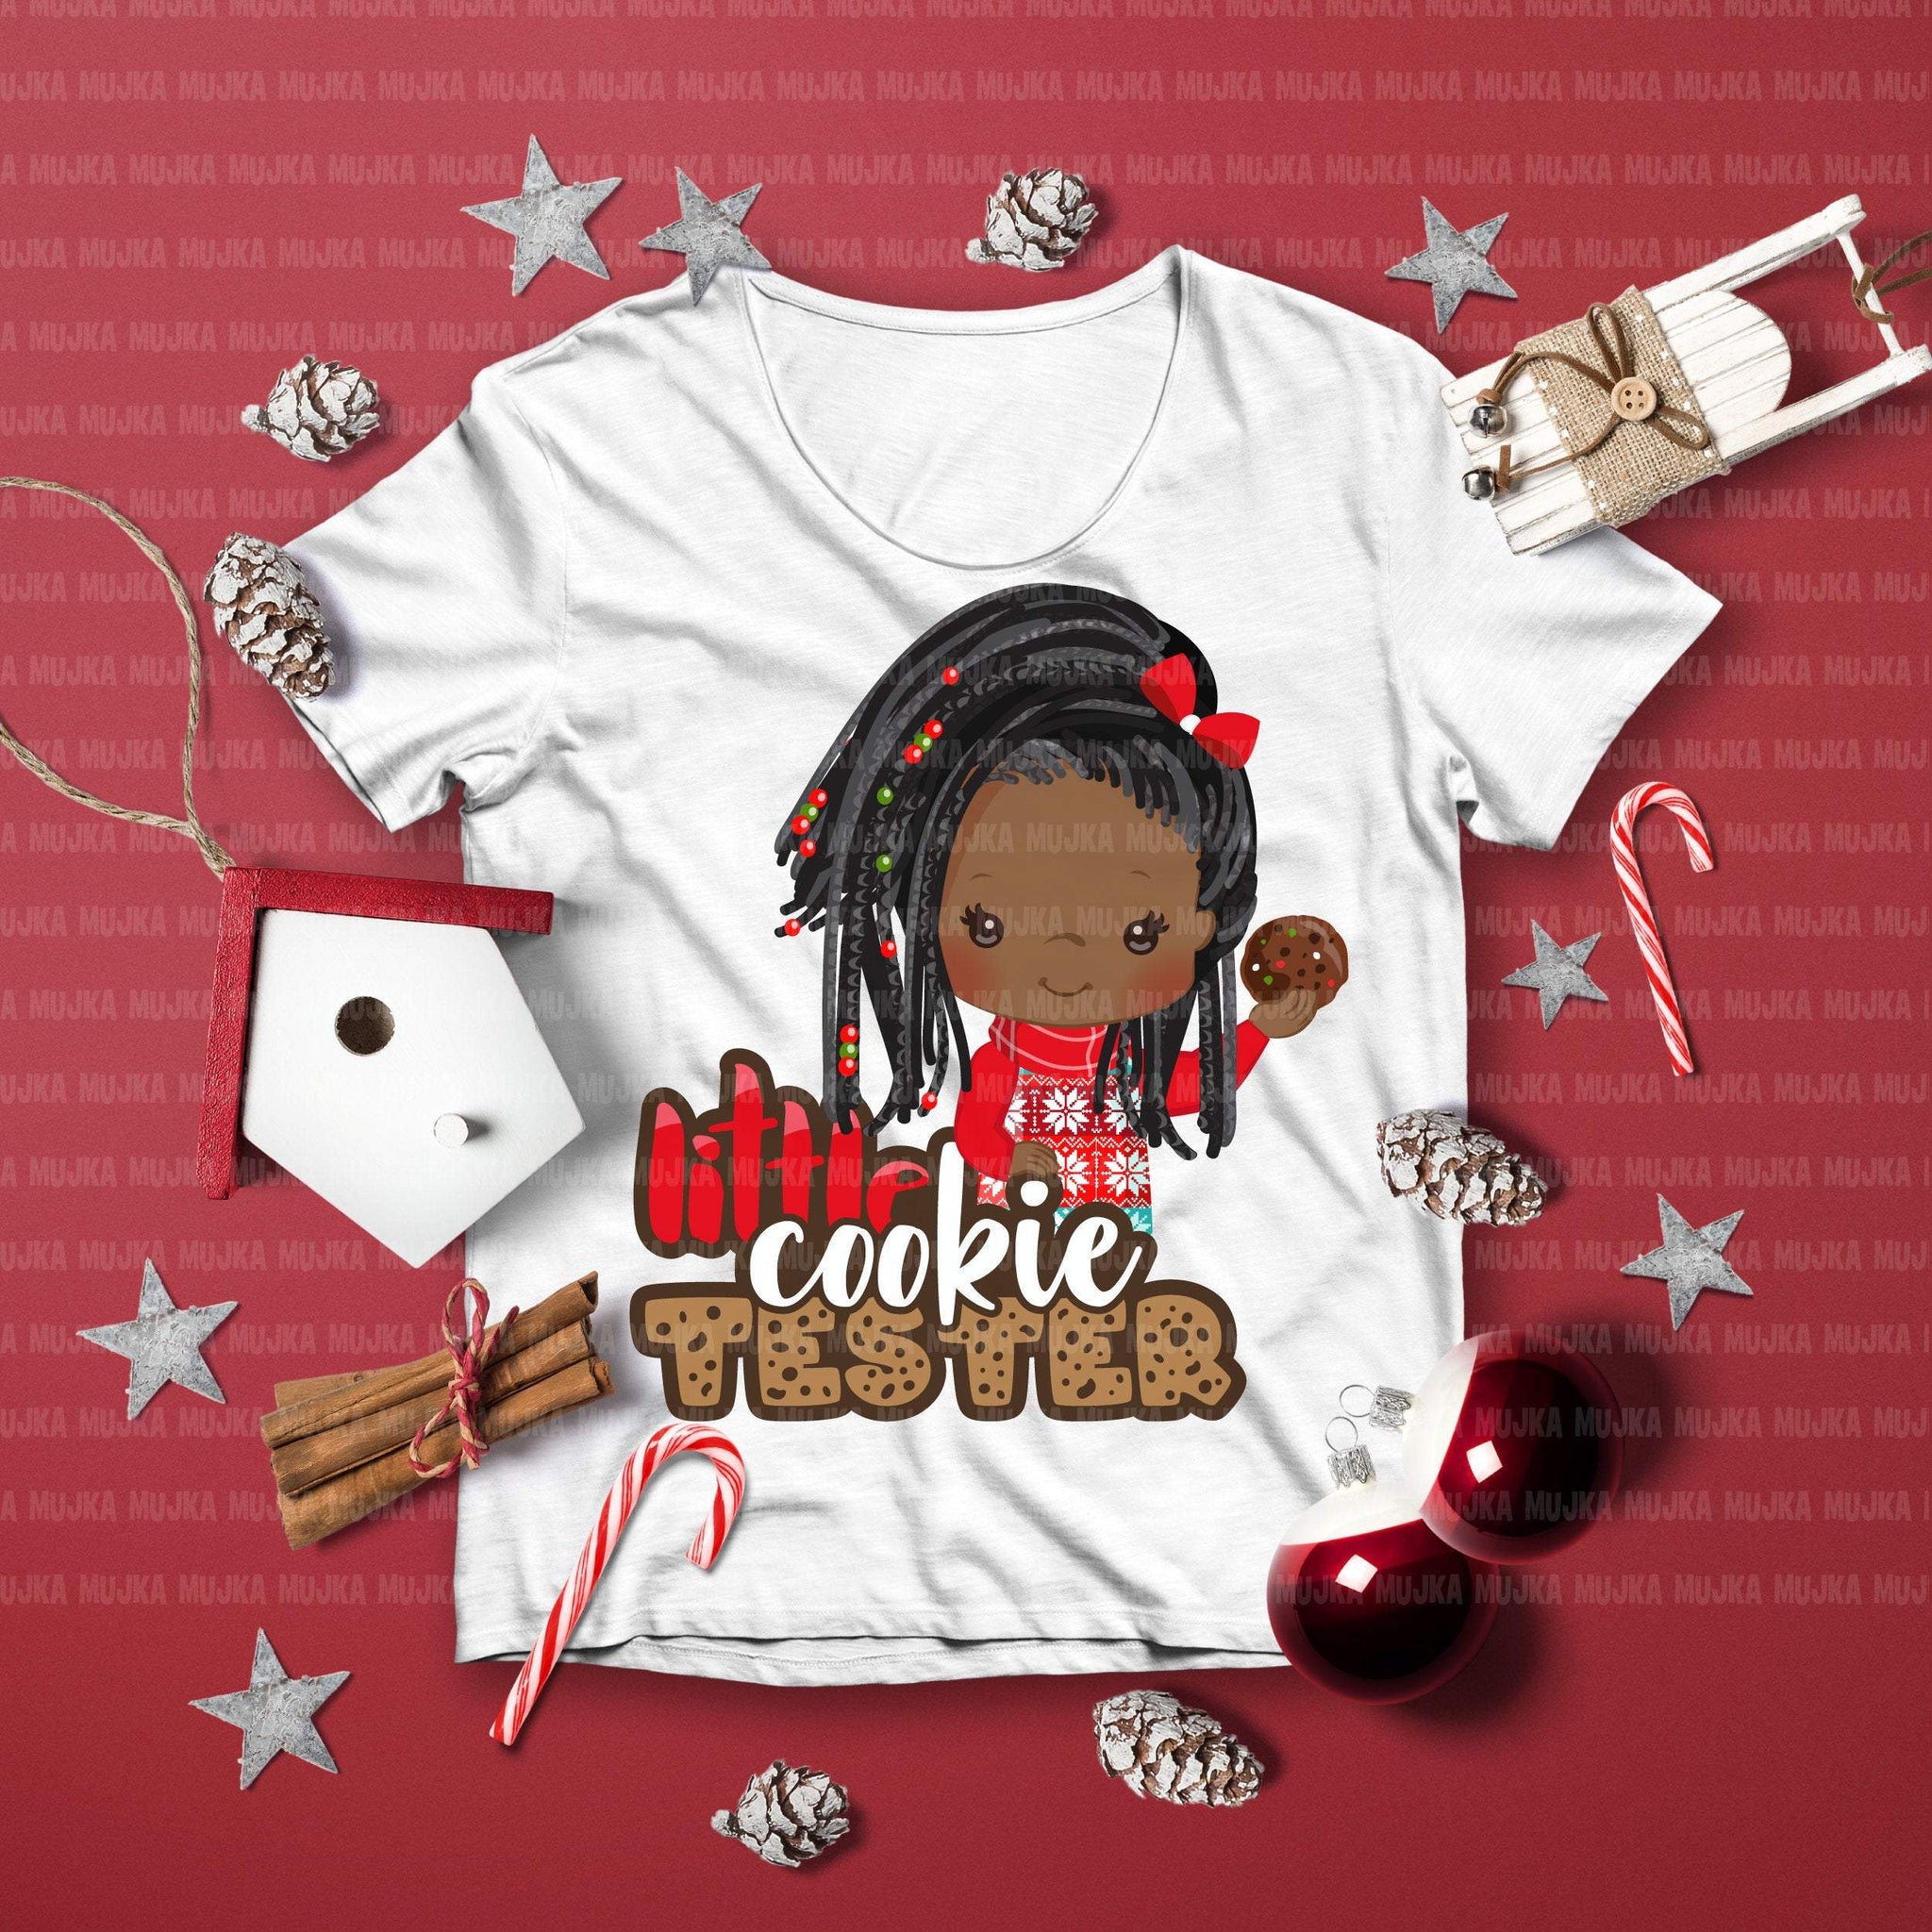 Christmas PNG digital, Little cookie Tester Printable HTV sublimation image transfer clipart, t-shirt Afro black girl graphics